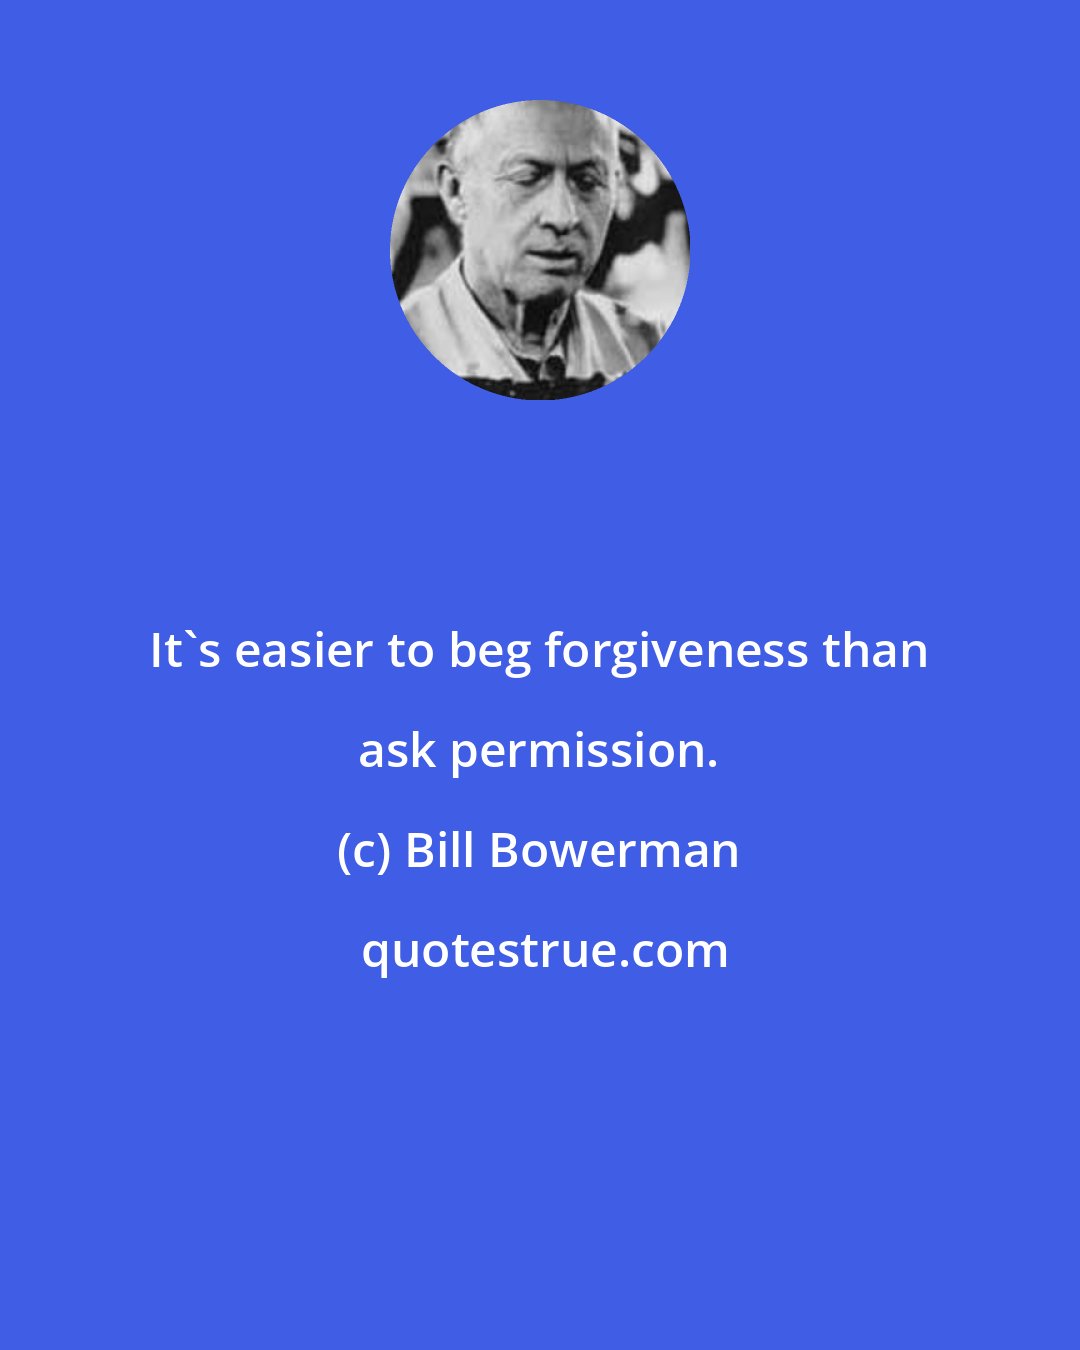 Bill Bowerman: It's easier to beg forgiveness than ask permission.